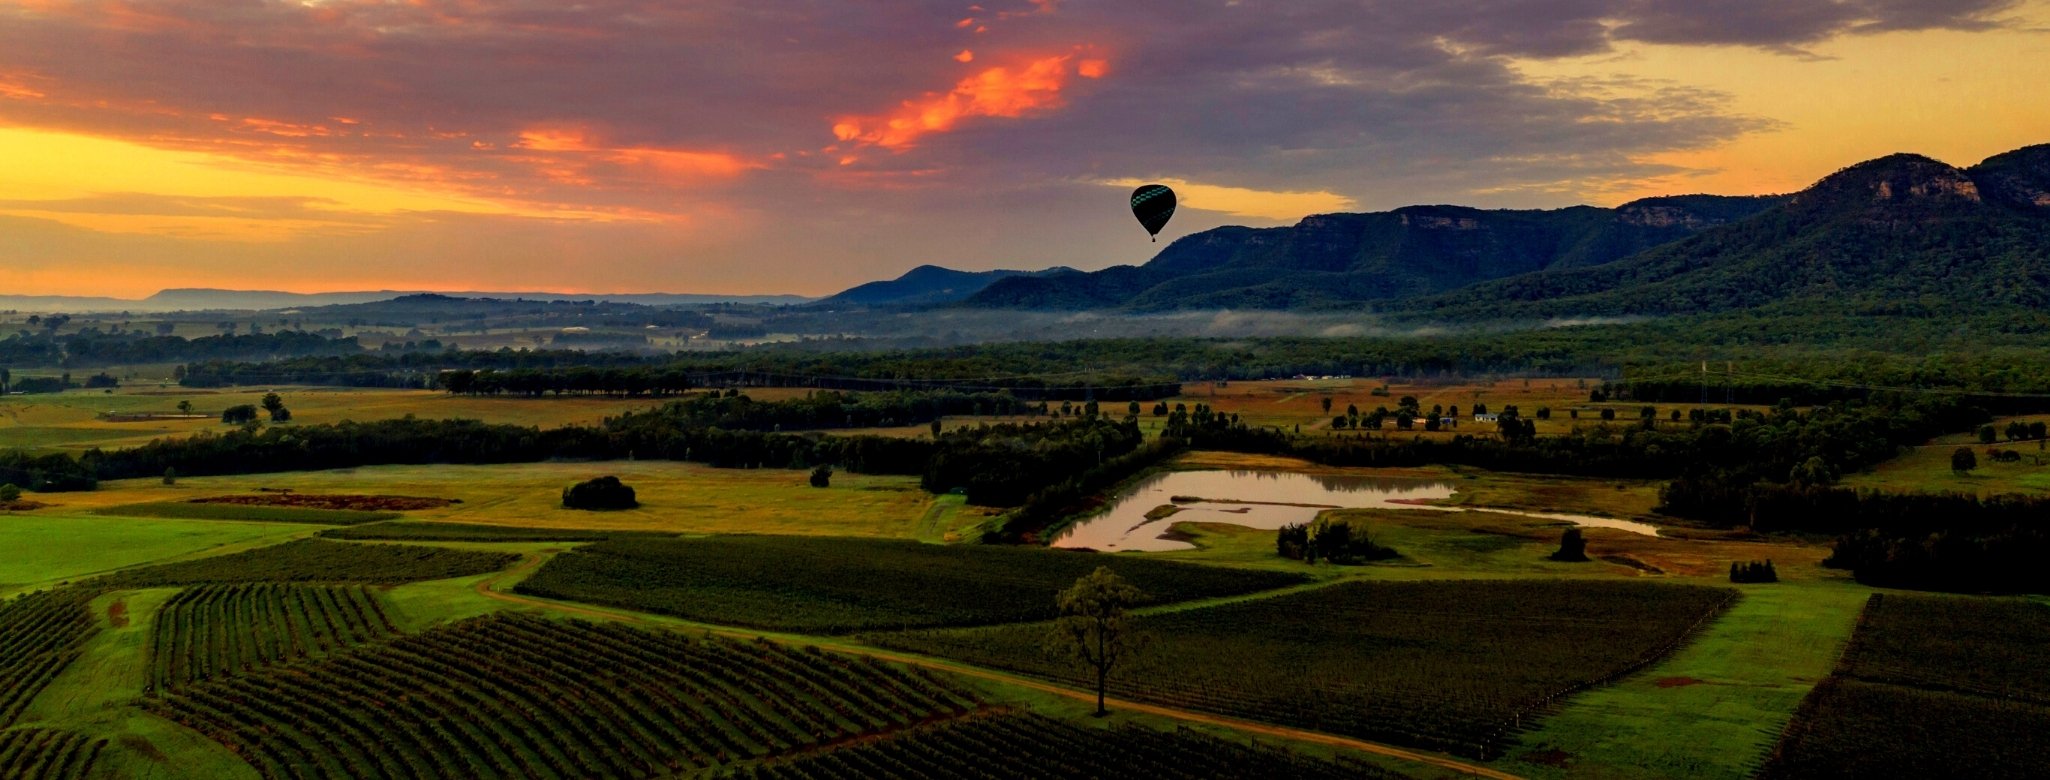 Hot air sunrise balloon ride in the Hunter Valley, New South Wales